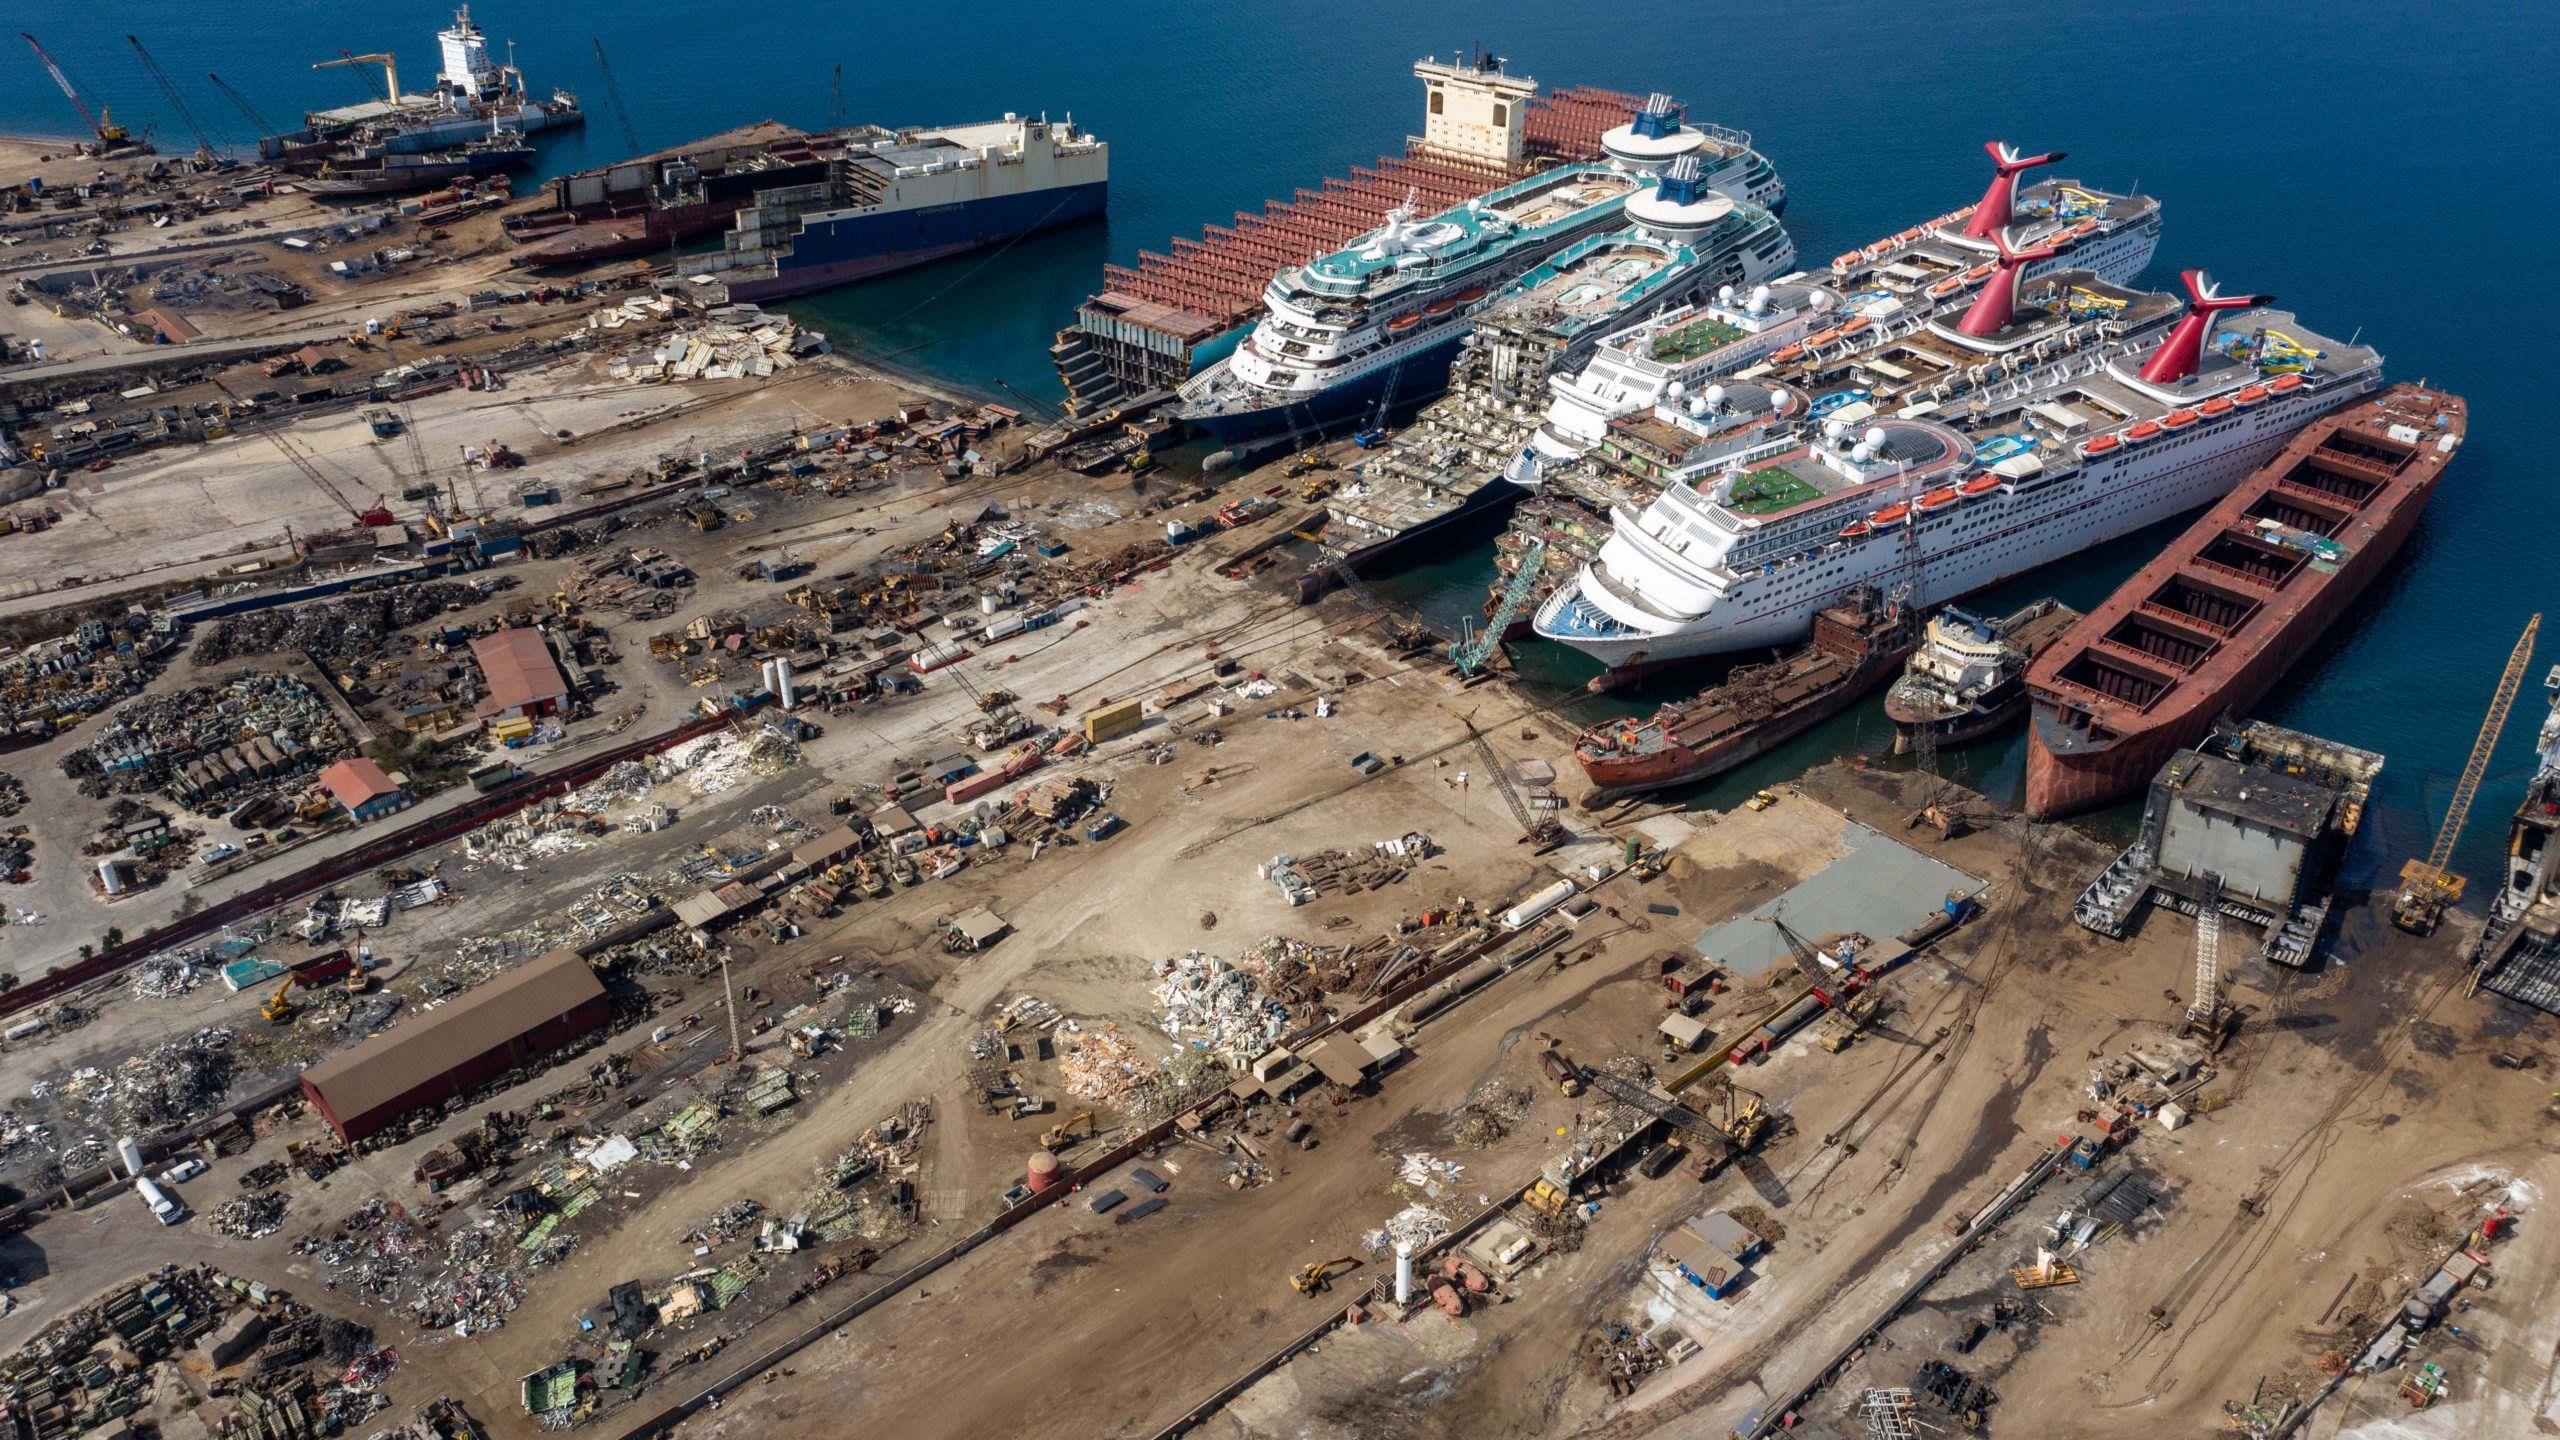 In this aerial view from a drone, five luxury cruise ships are seen being broken down for scrap metal at the Aliaga ship recycling port on October 02, 2020 in Izmir, Turkey.  (Photo: Chris McGrath, Getty Images)